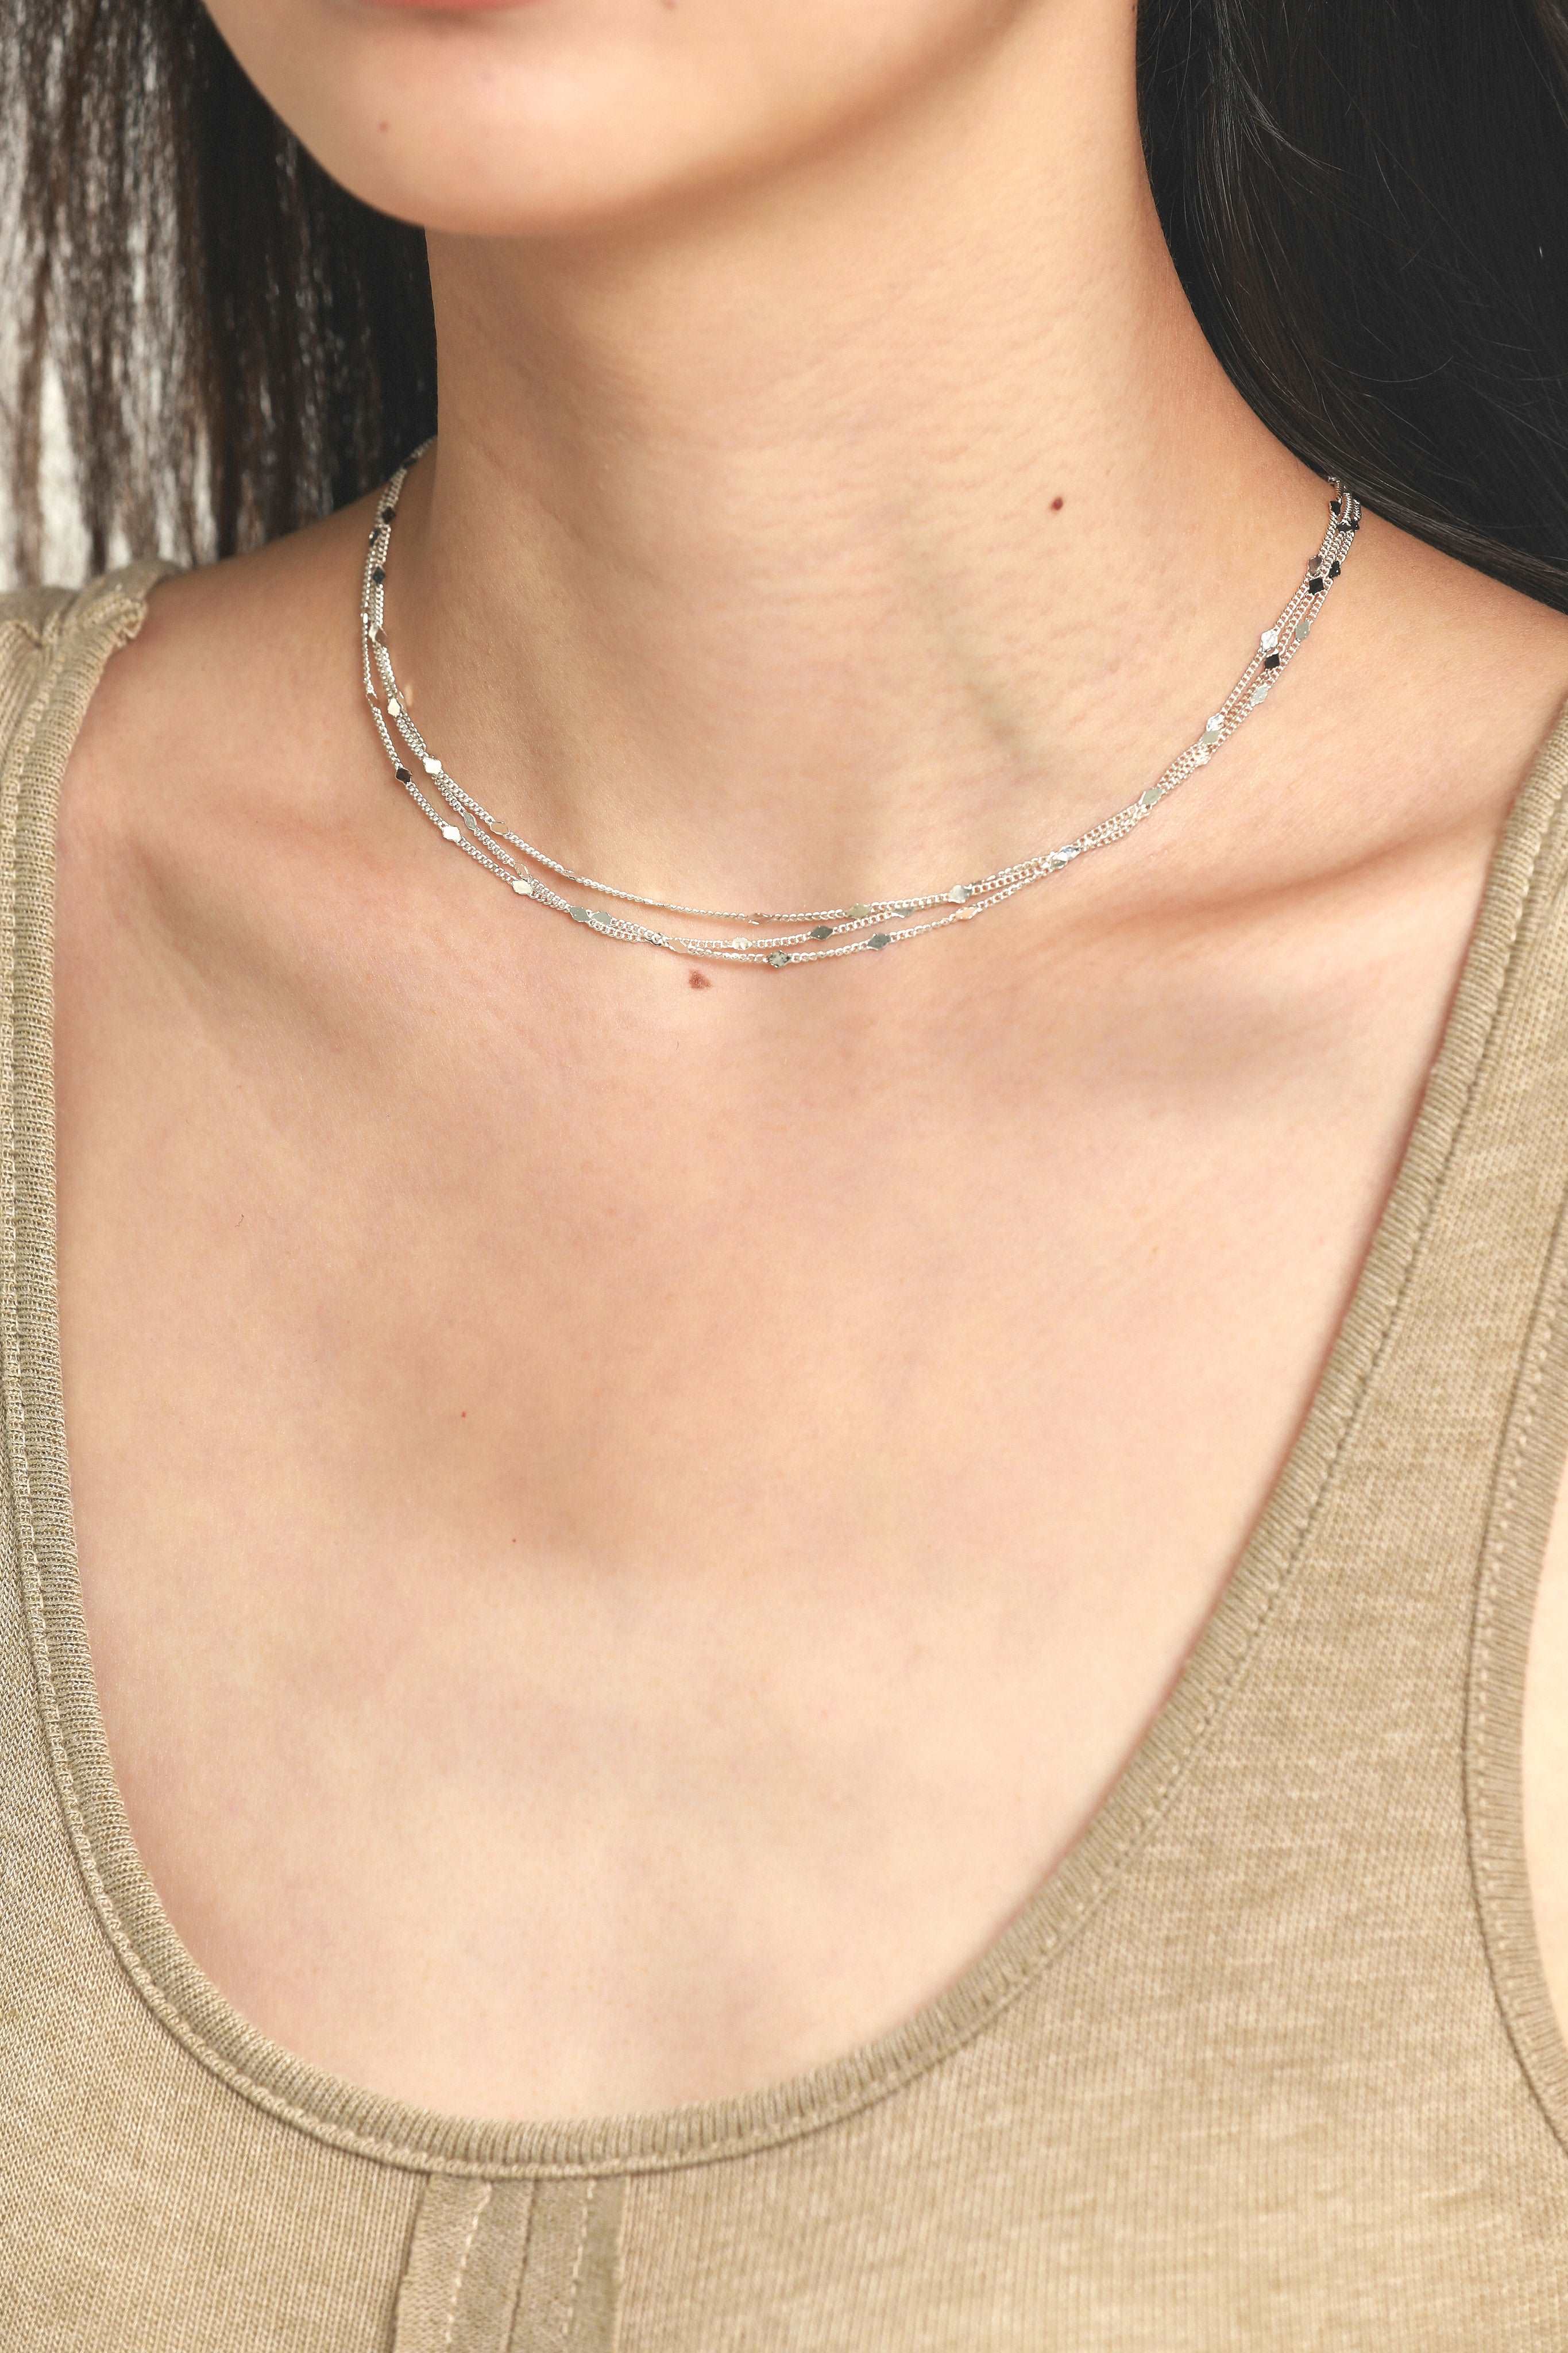 wearing 925 Silver Multi-layer Necklace